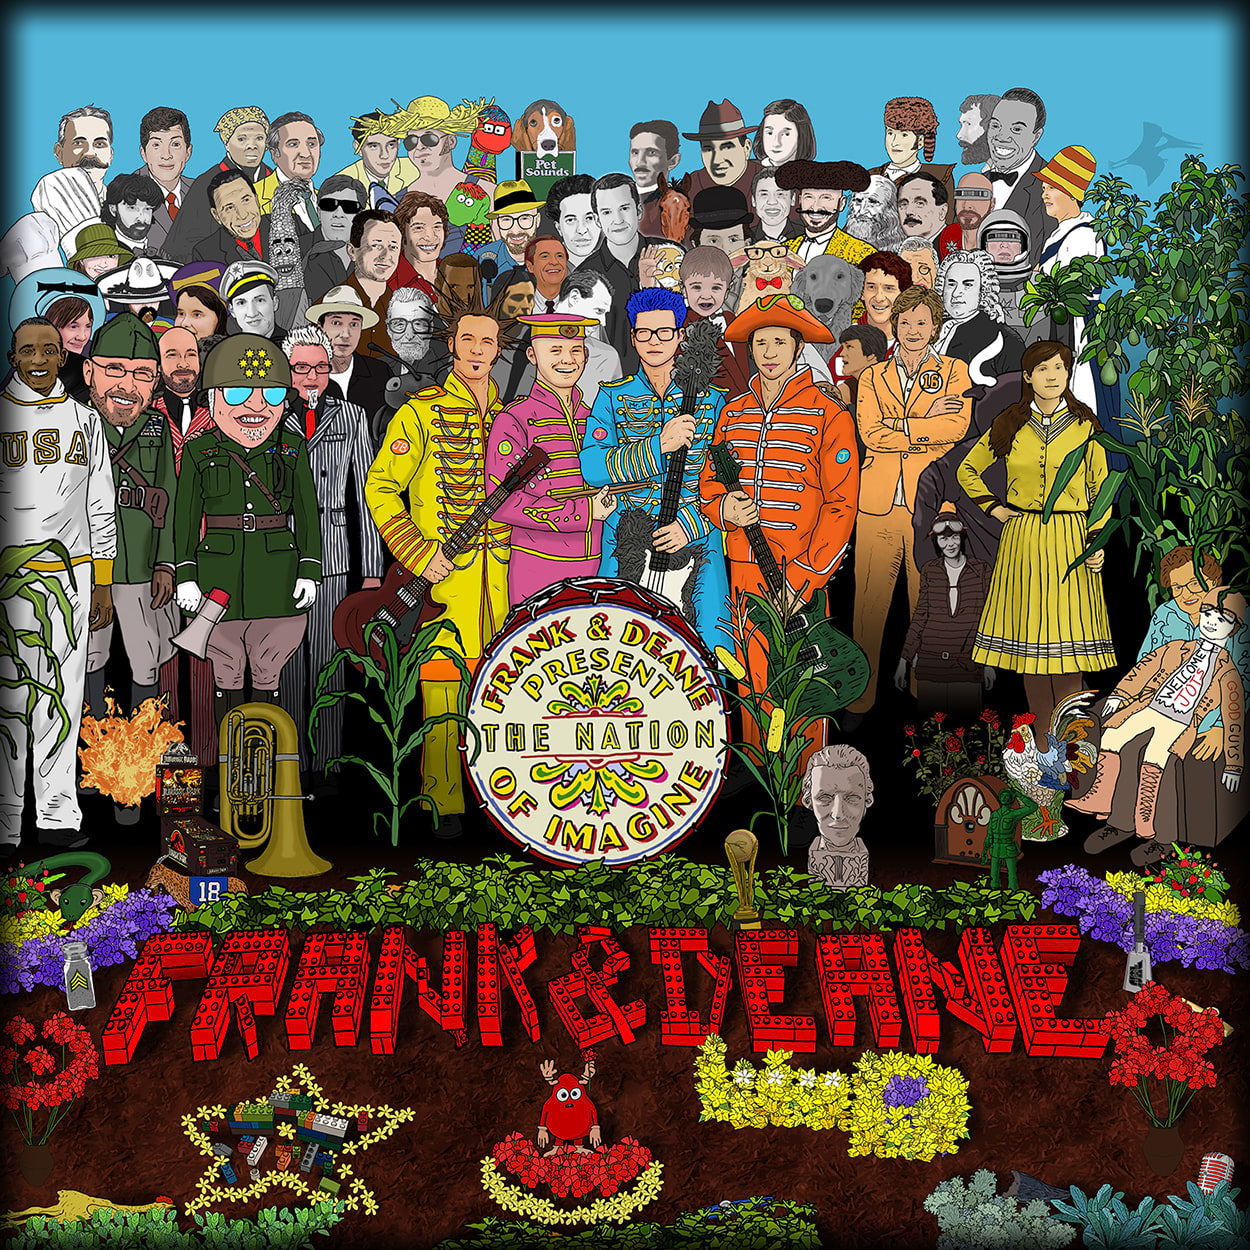 04-frank-and-deane-the-nation-of-imagine-album-cover-childrens-music.jpg